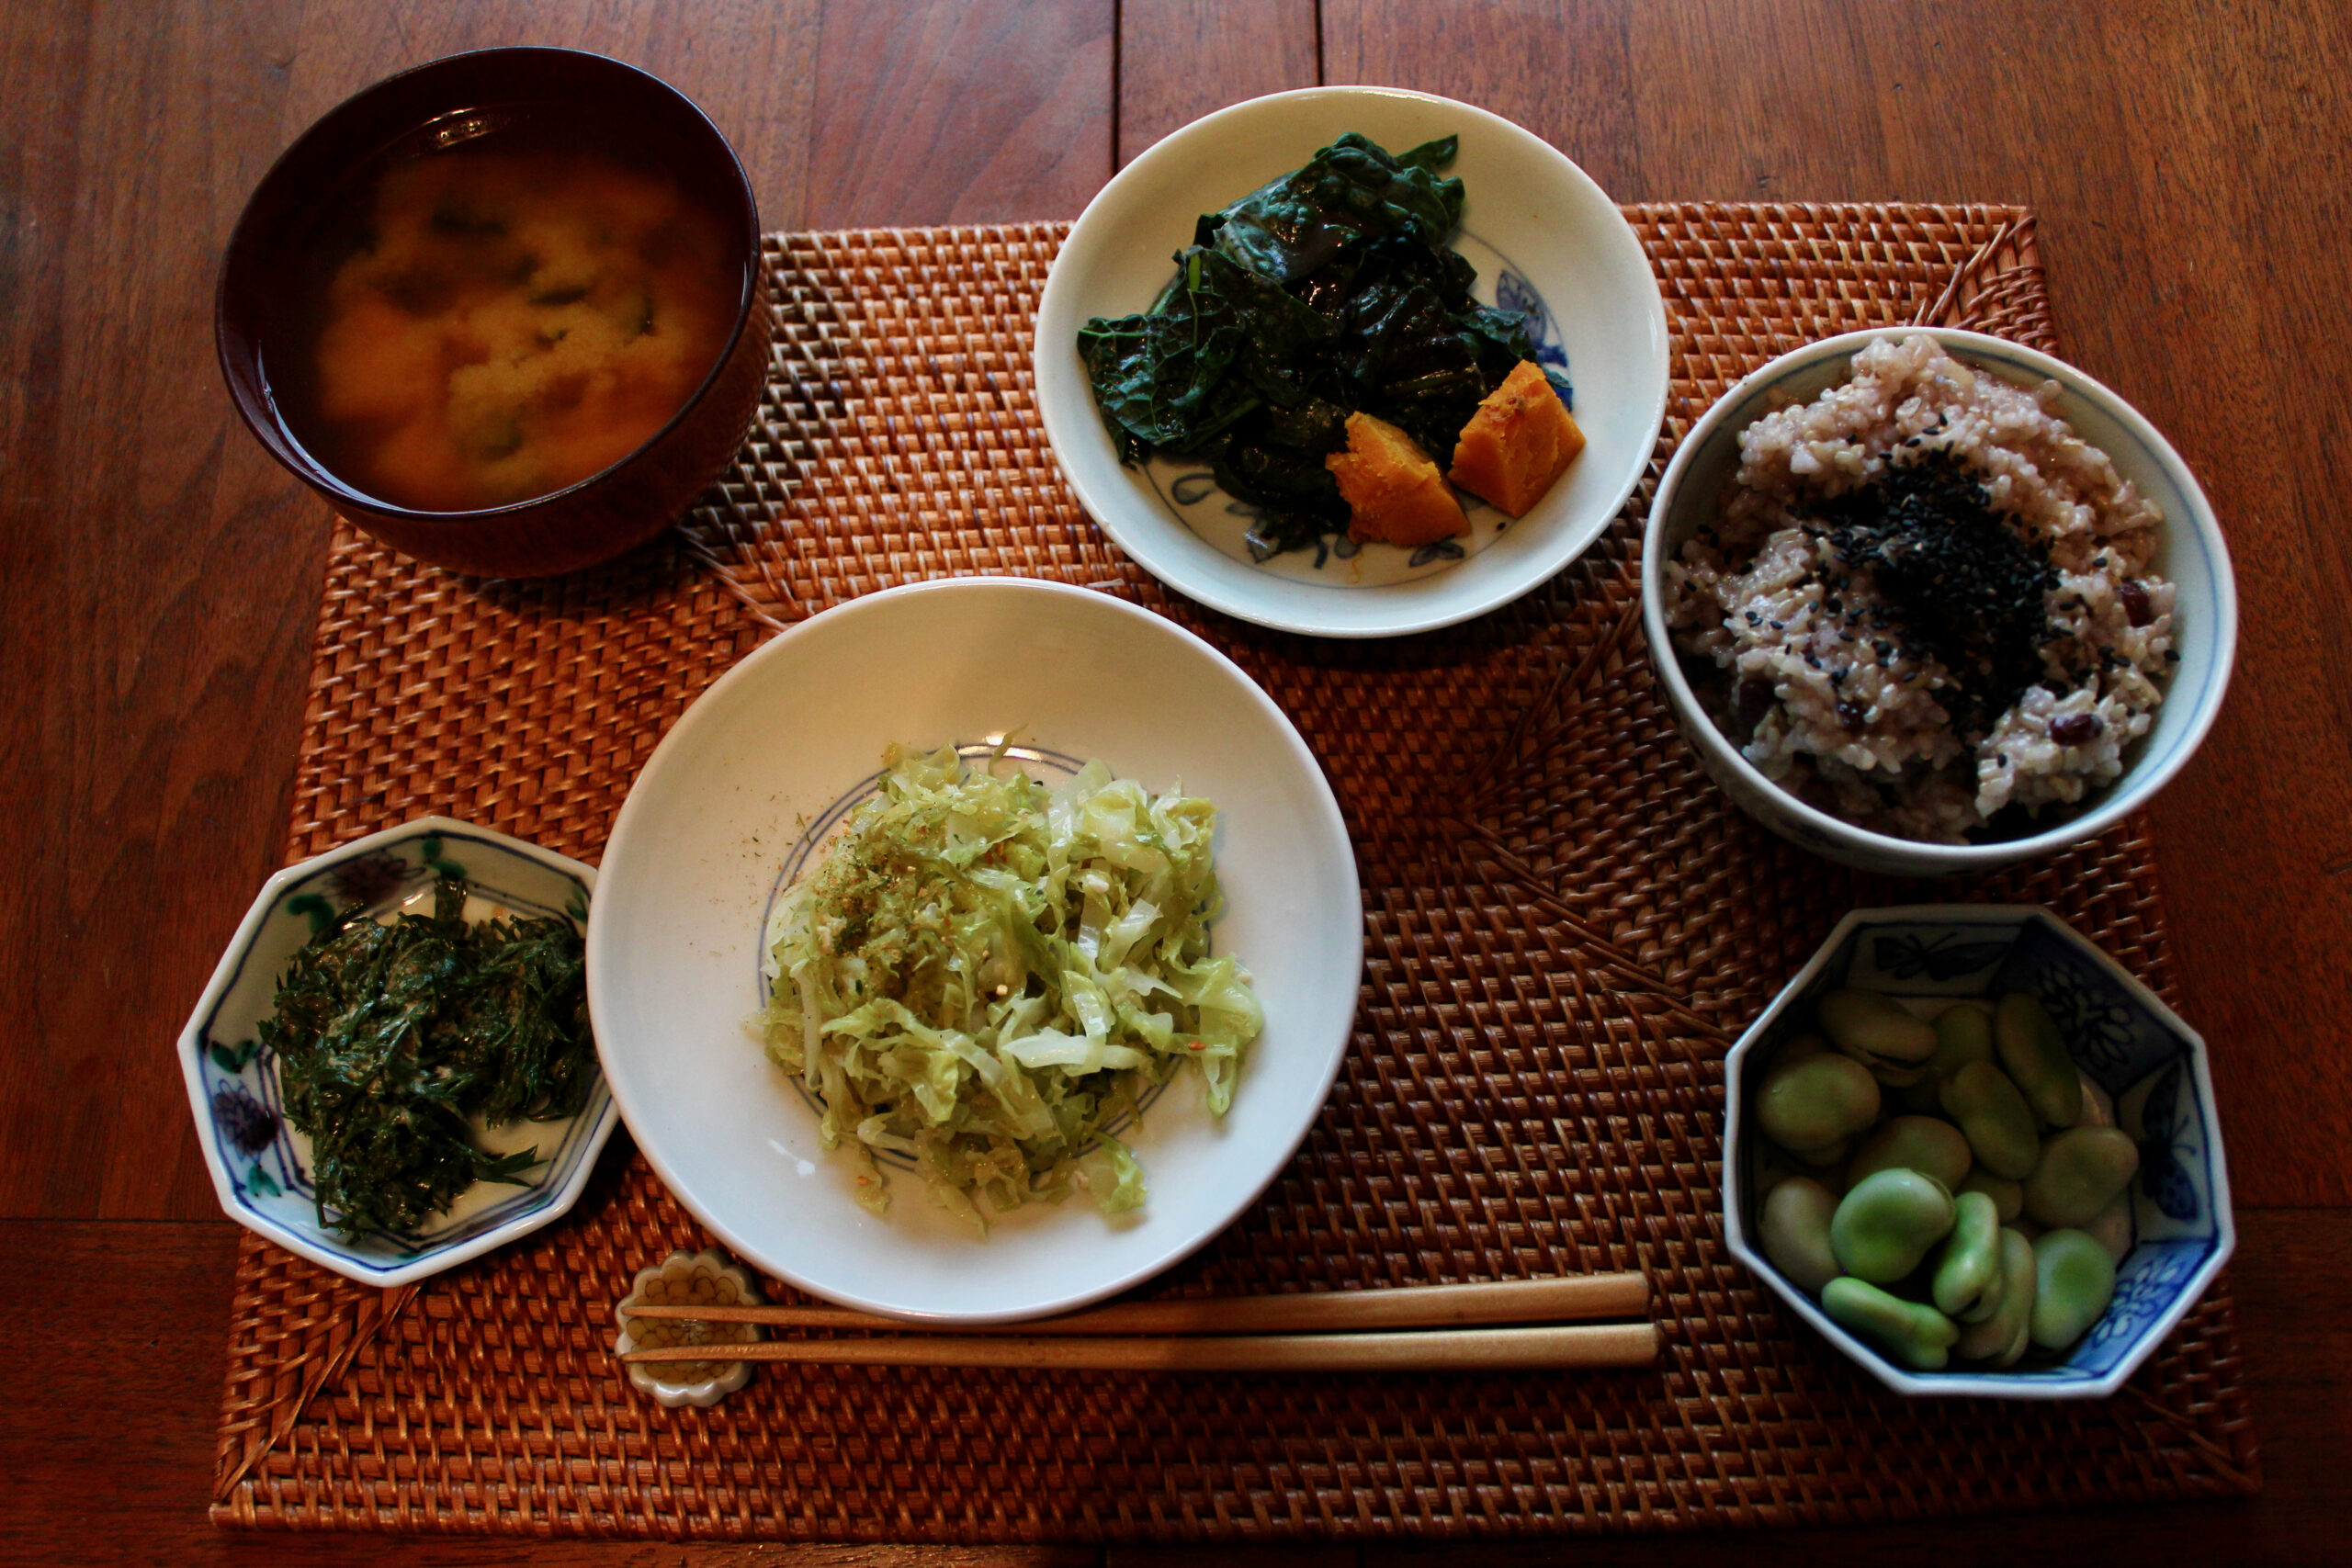 Dinner with boiled fava beans and beautiful vegetable dishes